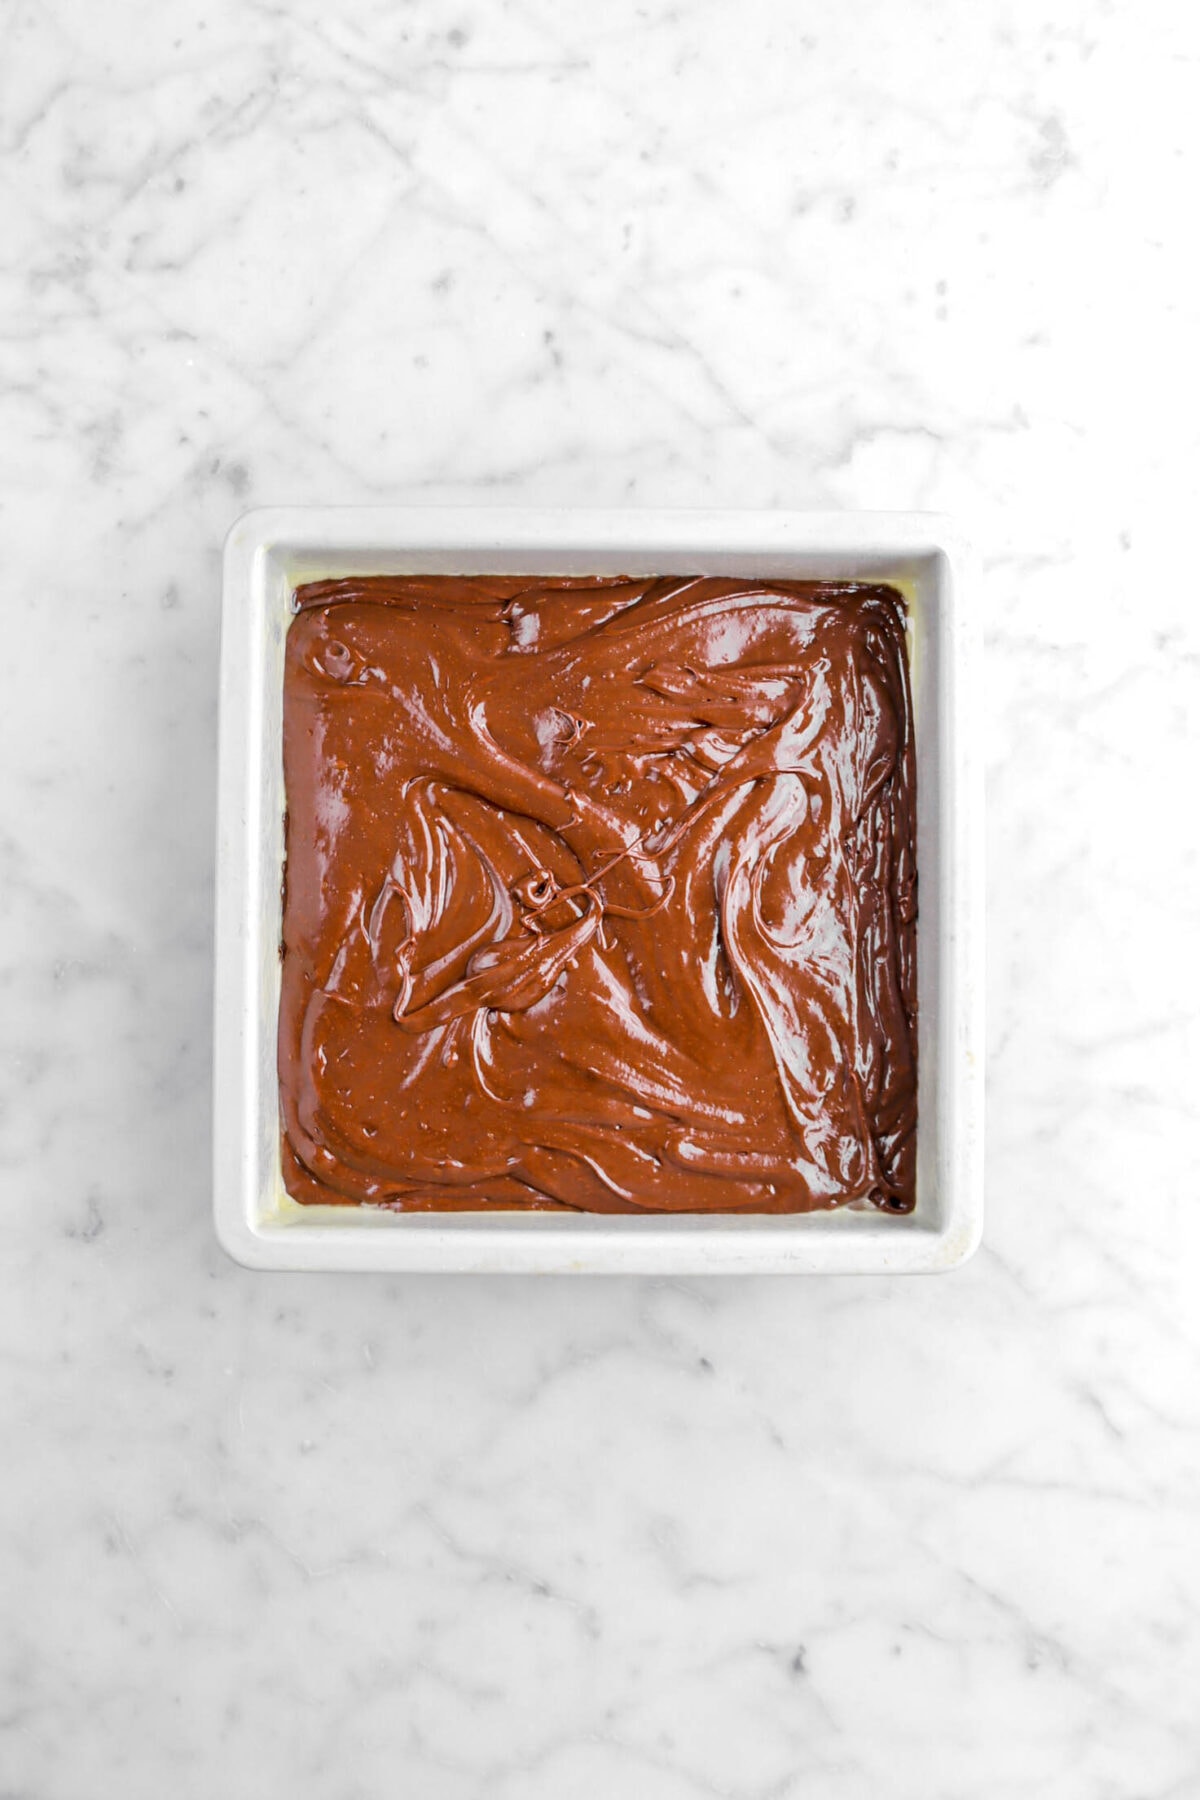 brownie batter in square pan on marble surface